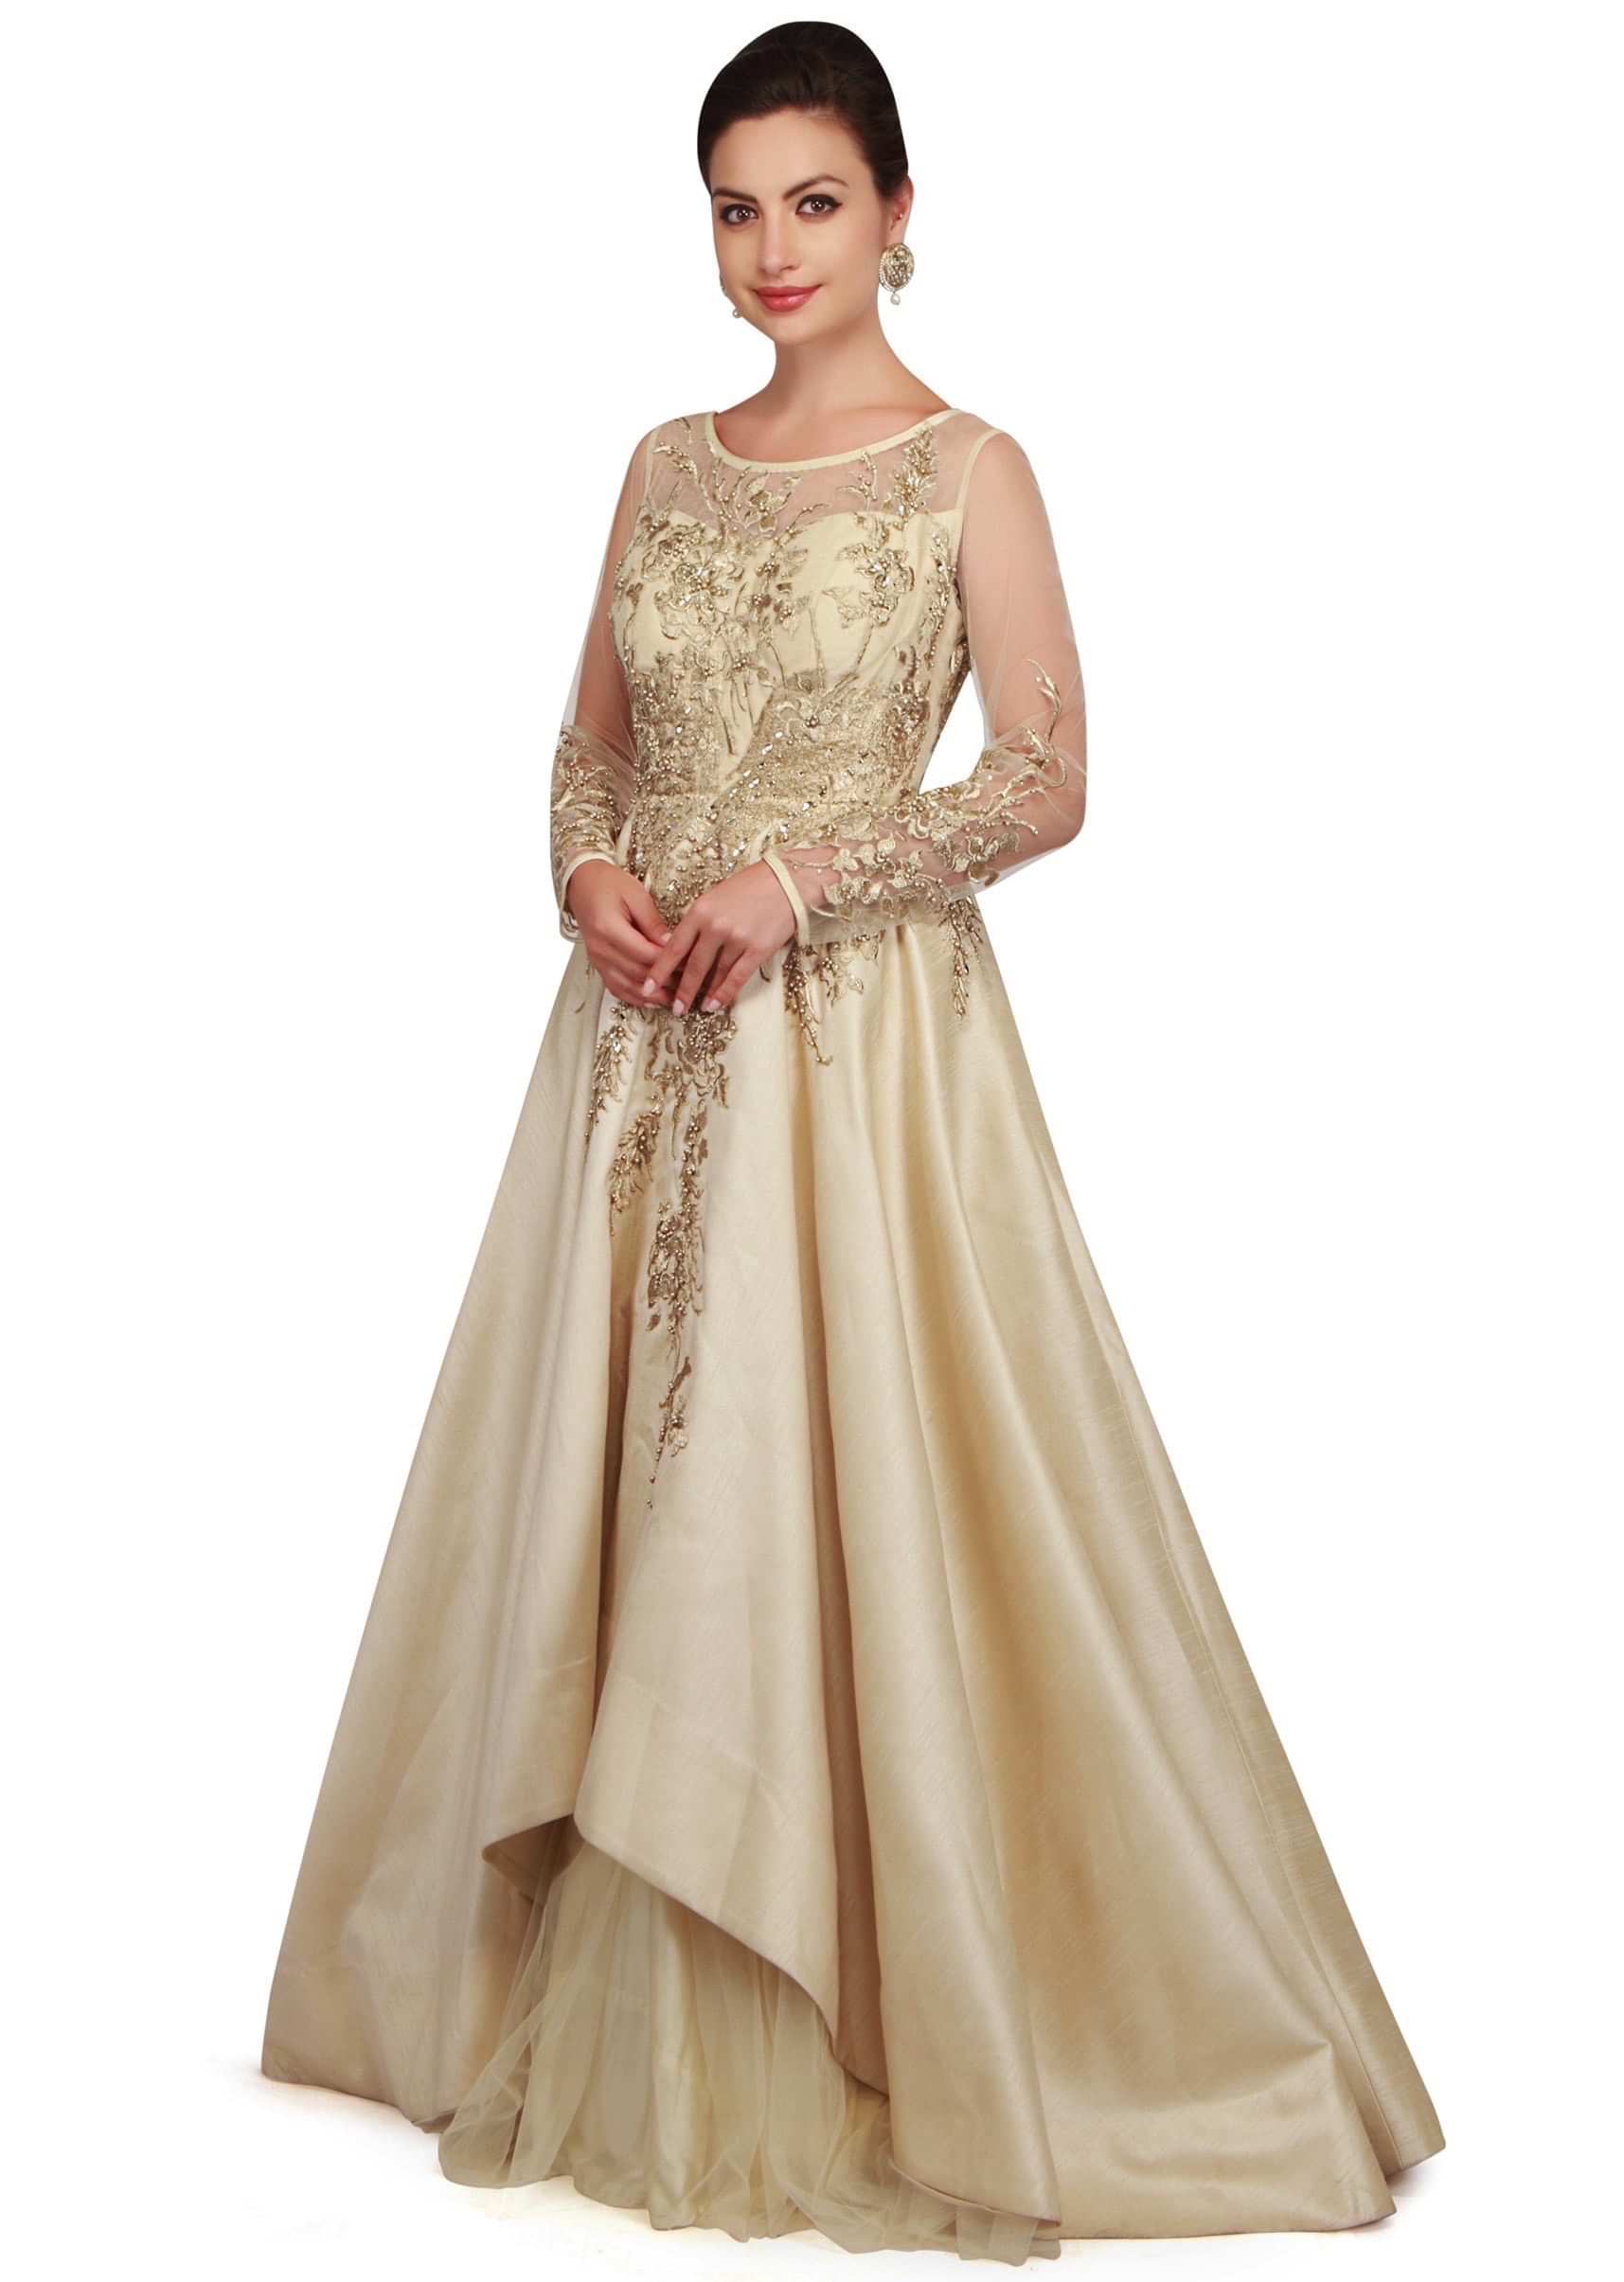 Pearl Cream Gown With Bodice In Pearl And Zari Work Online - Kalki Fashion